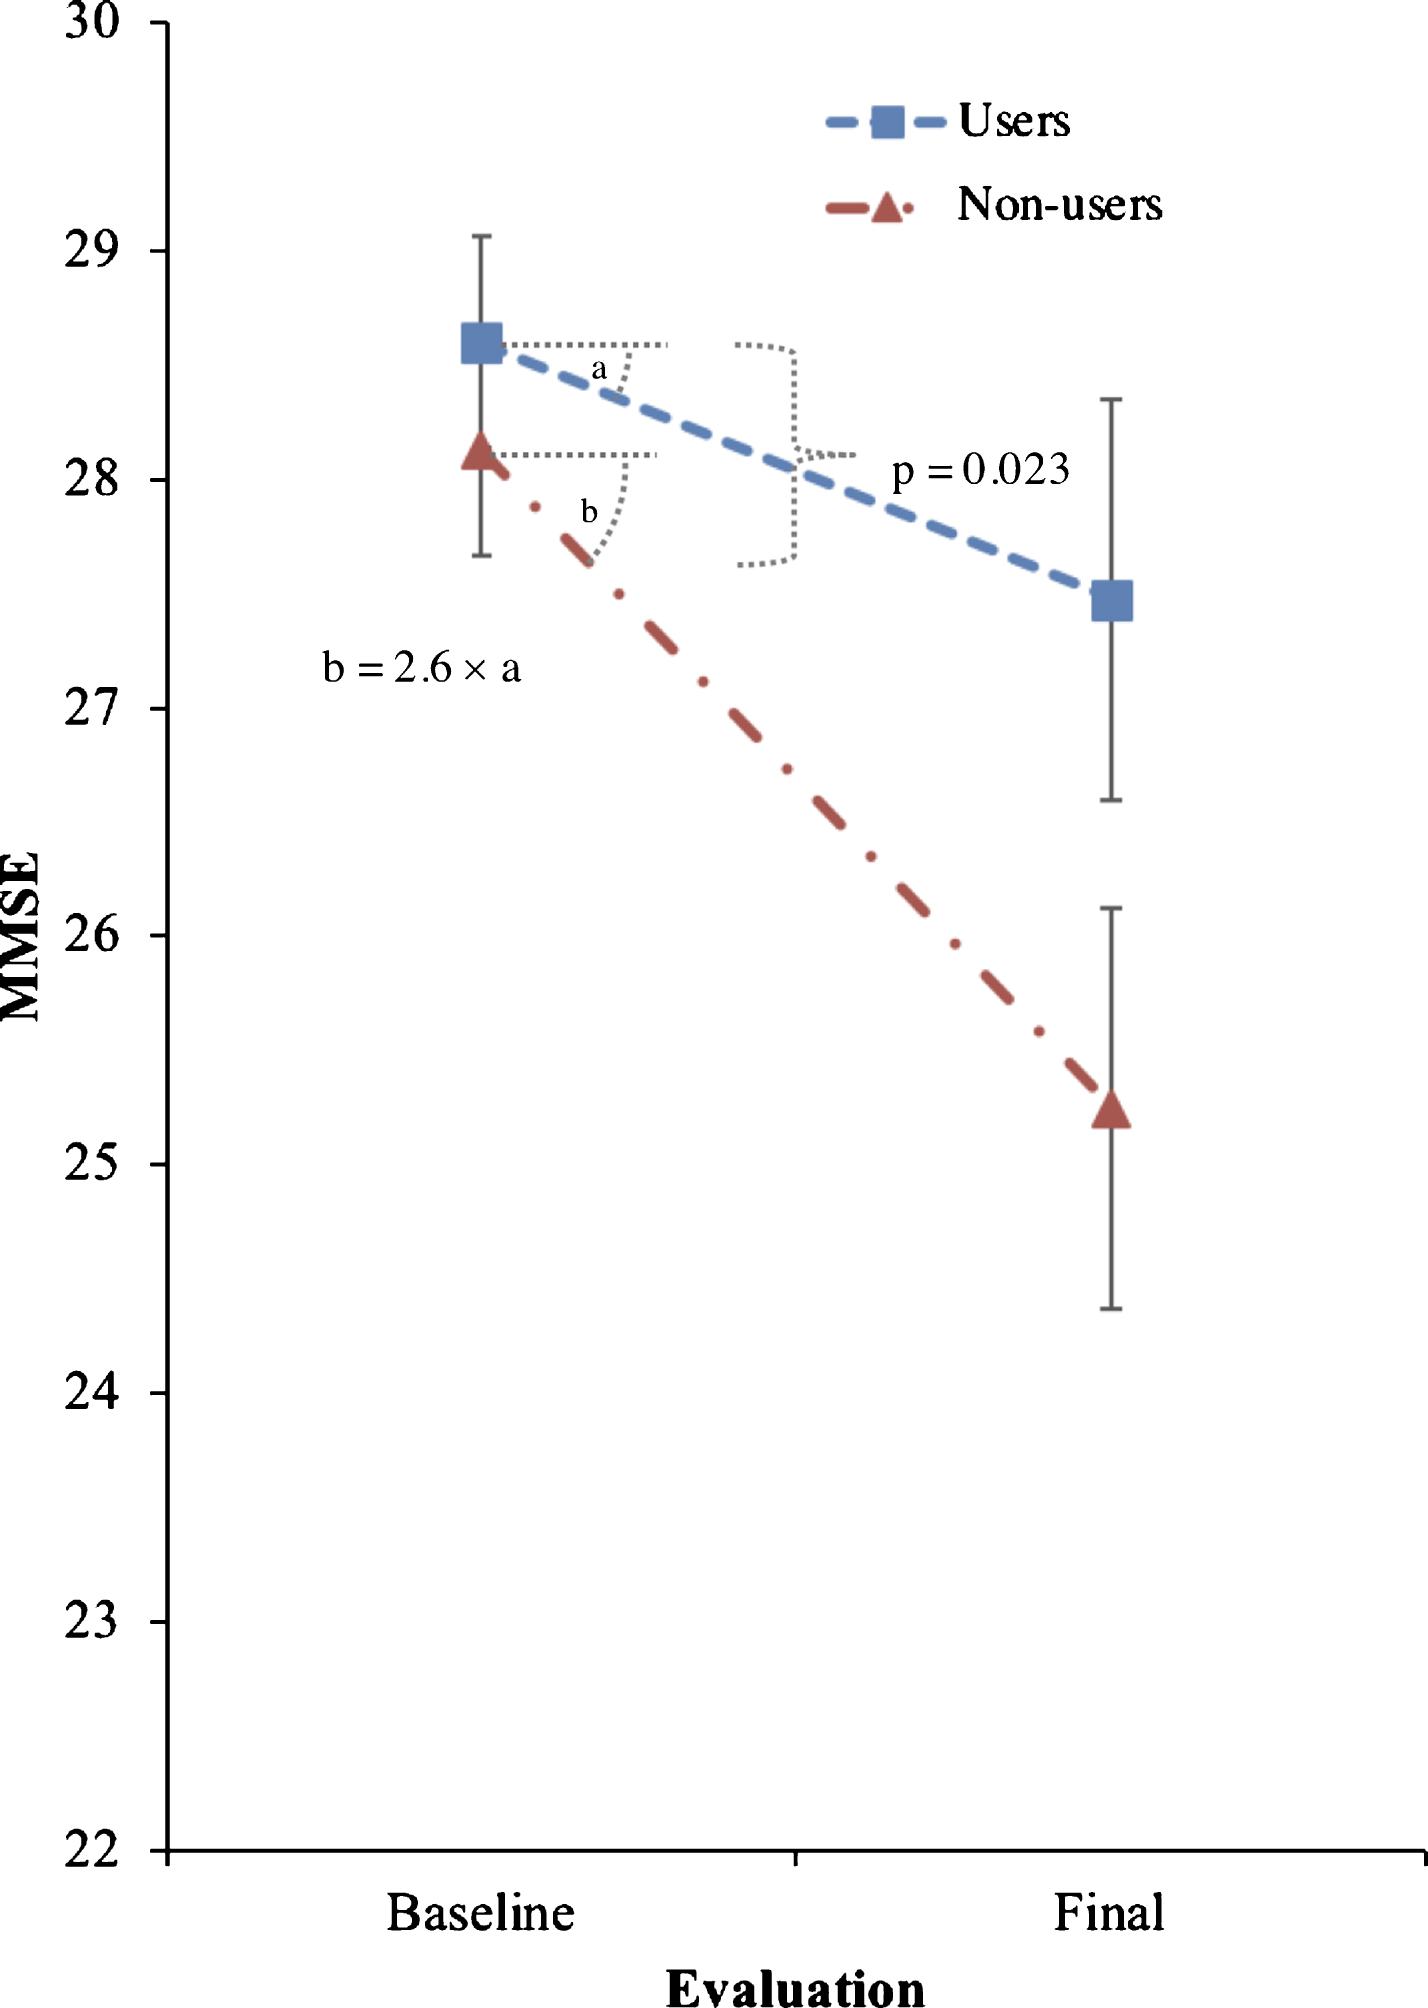 Effects of trazodone use on primary outcome (MMSE). Effects of trazodone on MMSE performance between 25 trazodone users and 25 trazodone non-users over an inter-evaluation interval of 4.12 years. Error bars indicate standard error of the mean.